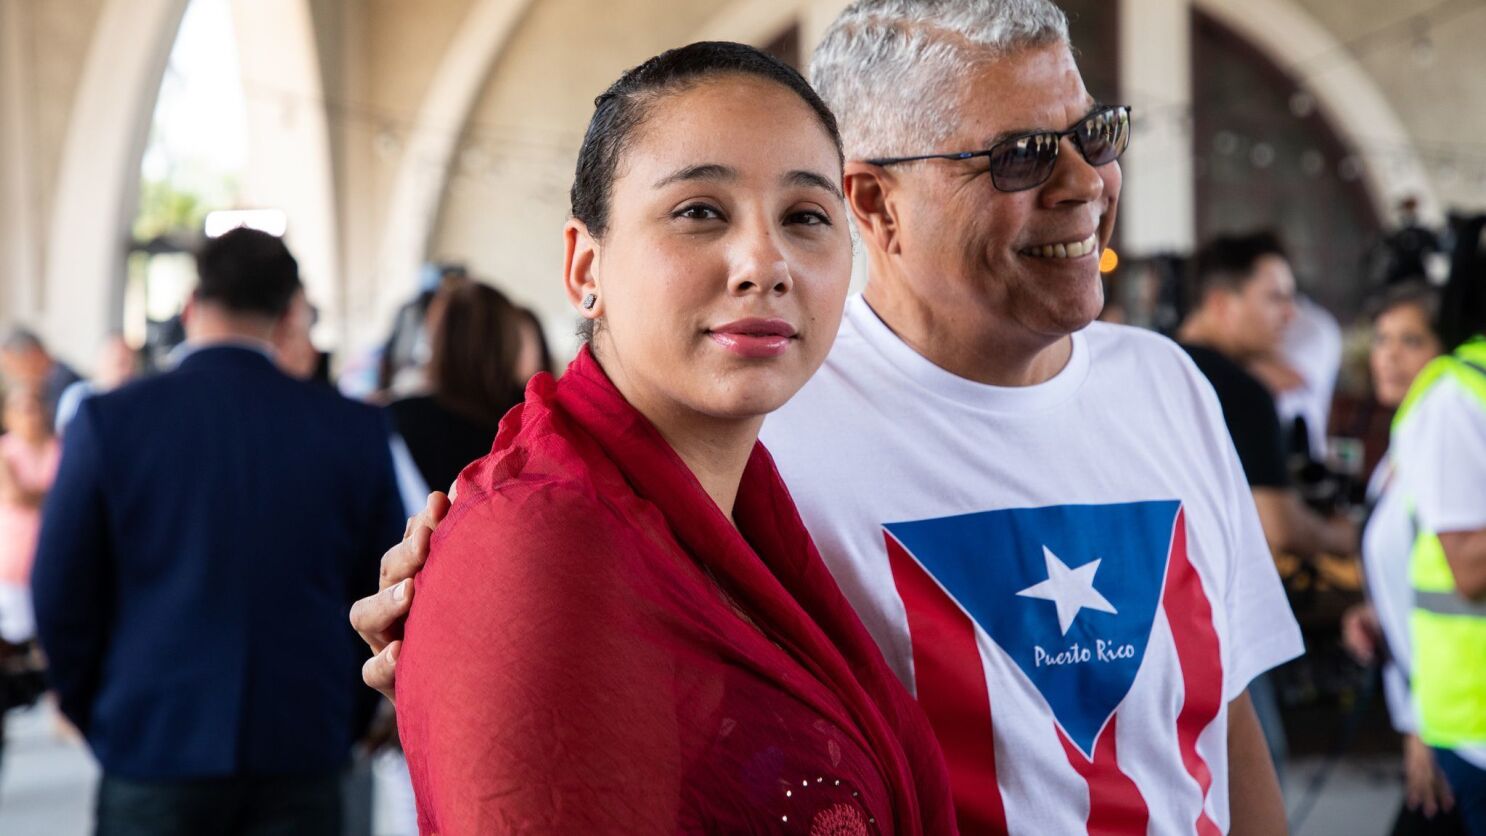 Woman Berated For Puerto Rican Flag Shirt Hopes Her Experience Shines A Light On What S Going On With Racism Los Angeles Times